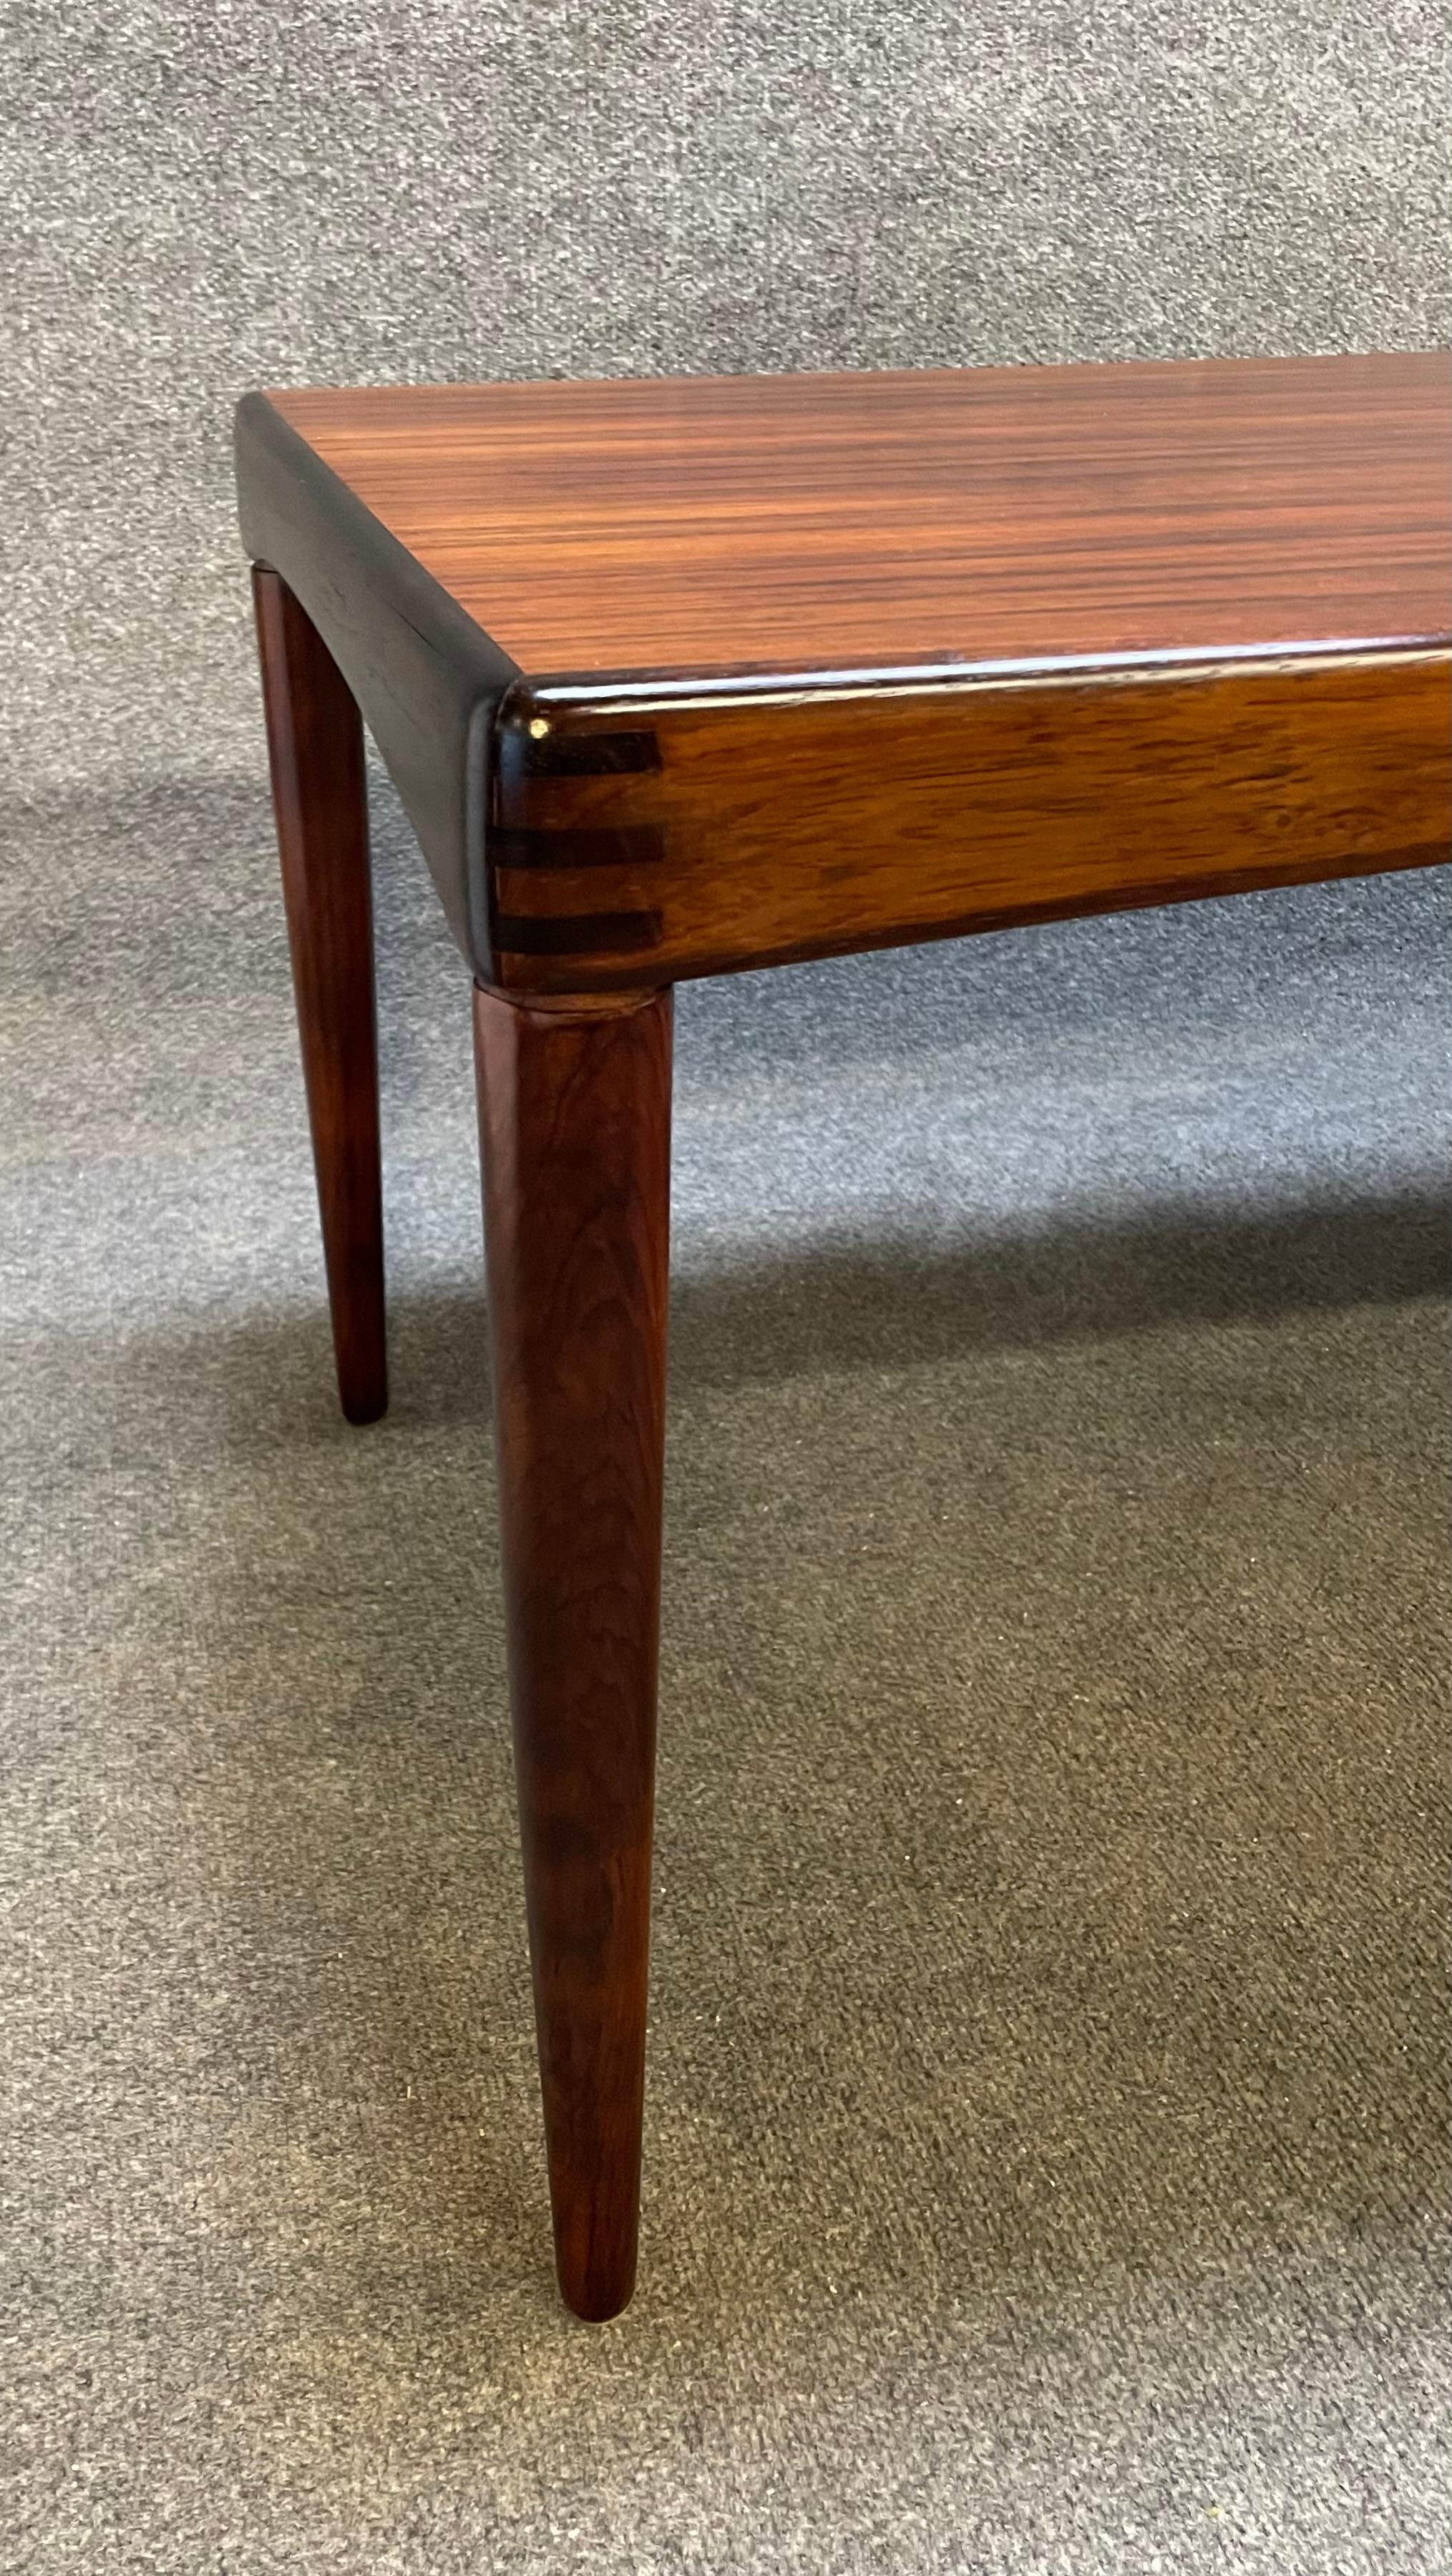 Here is a beautiful scandinavian modern cocktail table in rosewood designed by HW Klein and manufactured by Bramin Mobler in Denmark in the 1960's.
This exquisite table, recently imported from Europe to California before its refinishing, features a